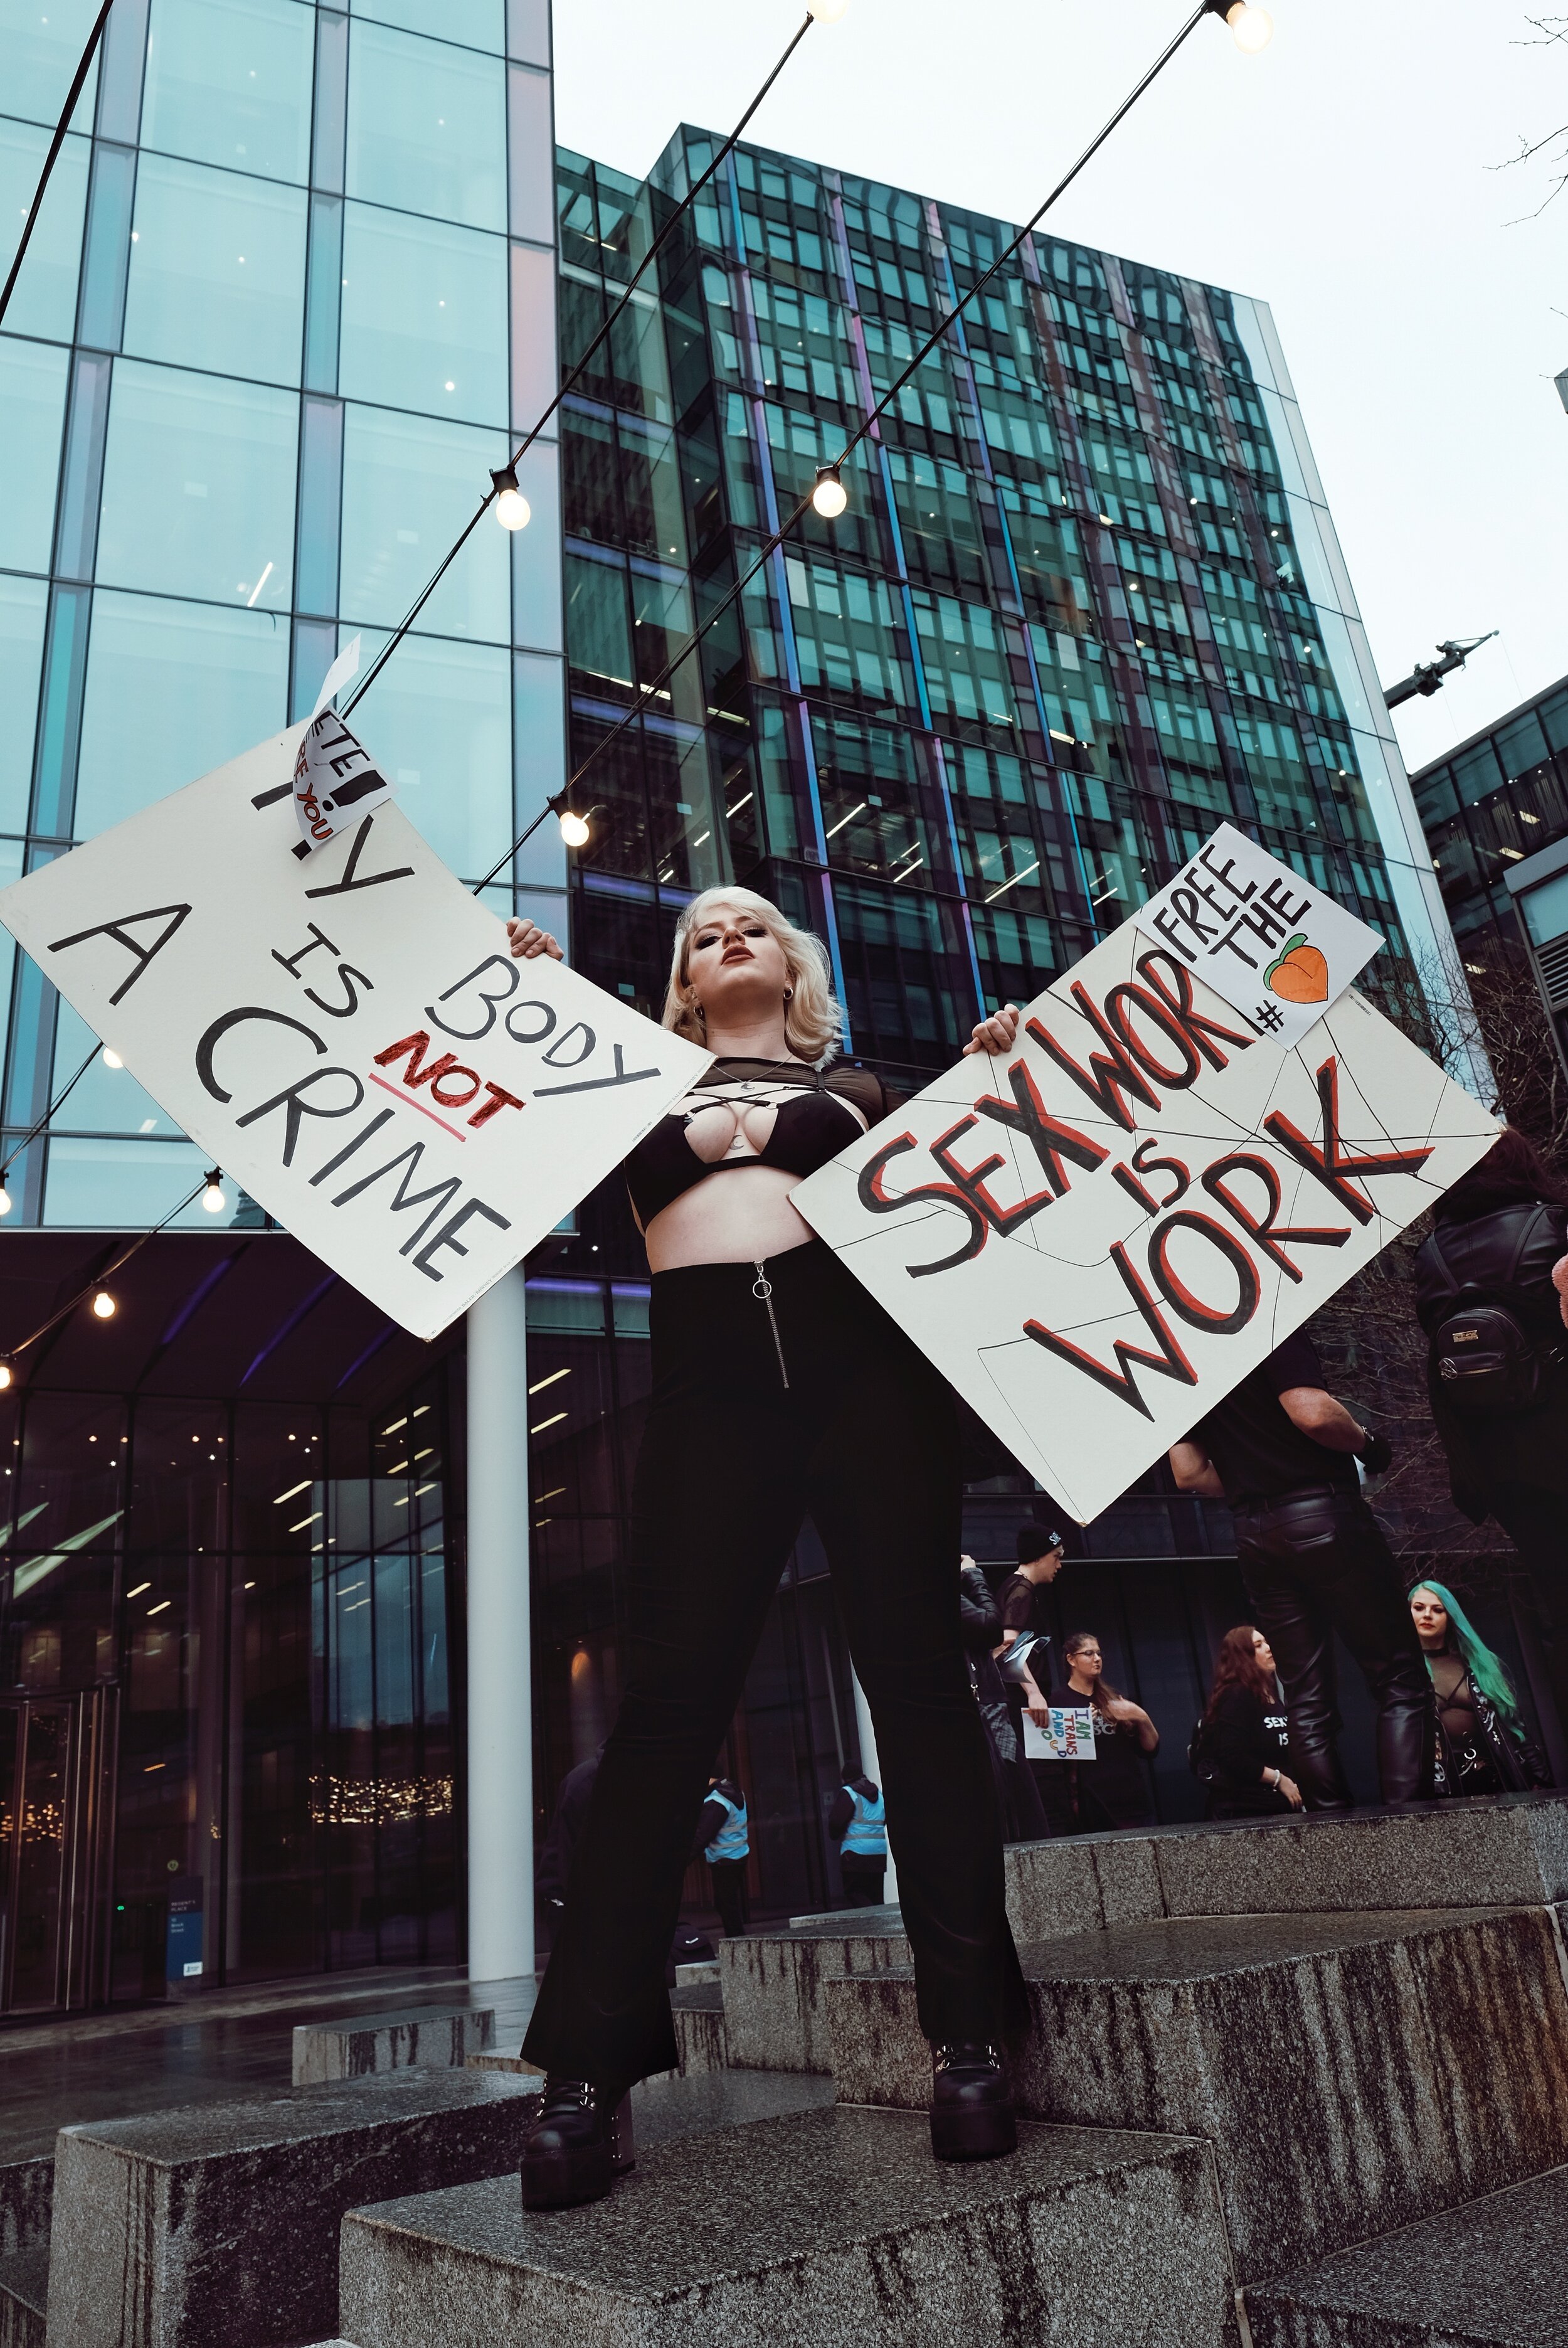  Sex workers protests call attention to hate crimes committed against sex workers all over the globe. Current laws around sex work criminalise the way that many sex workers earn a living, leaving many exposed to workplace exploitation, violence, and 